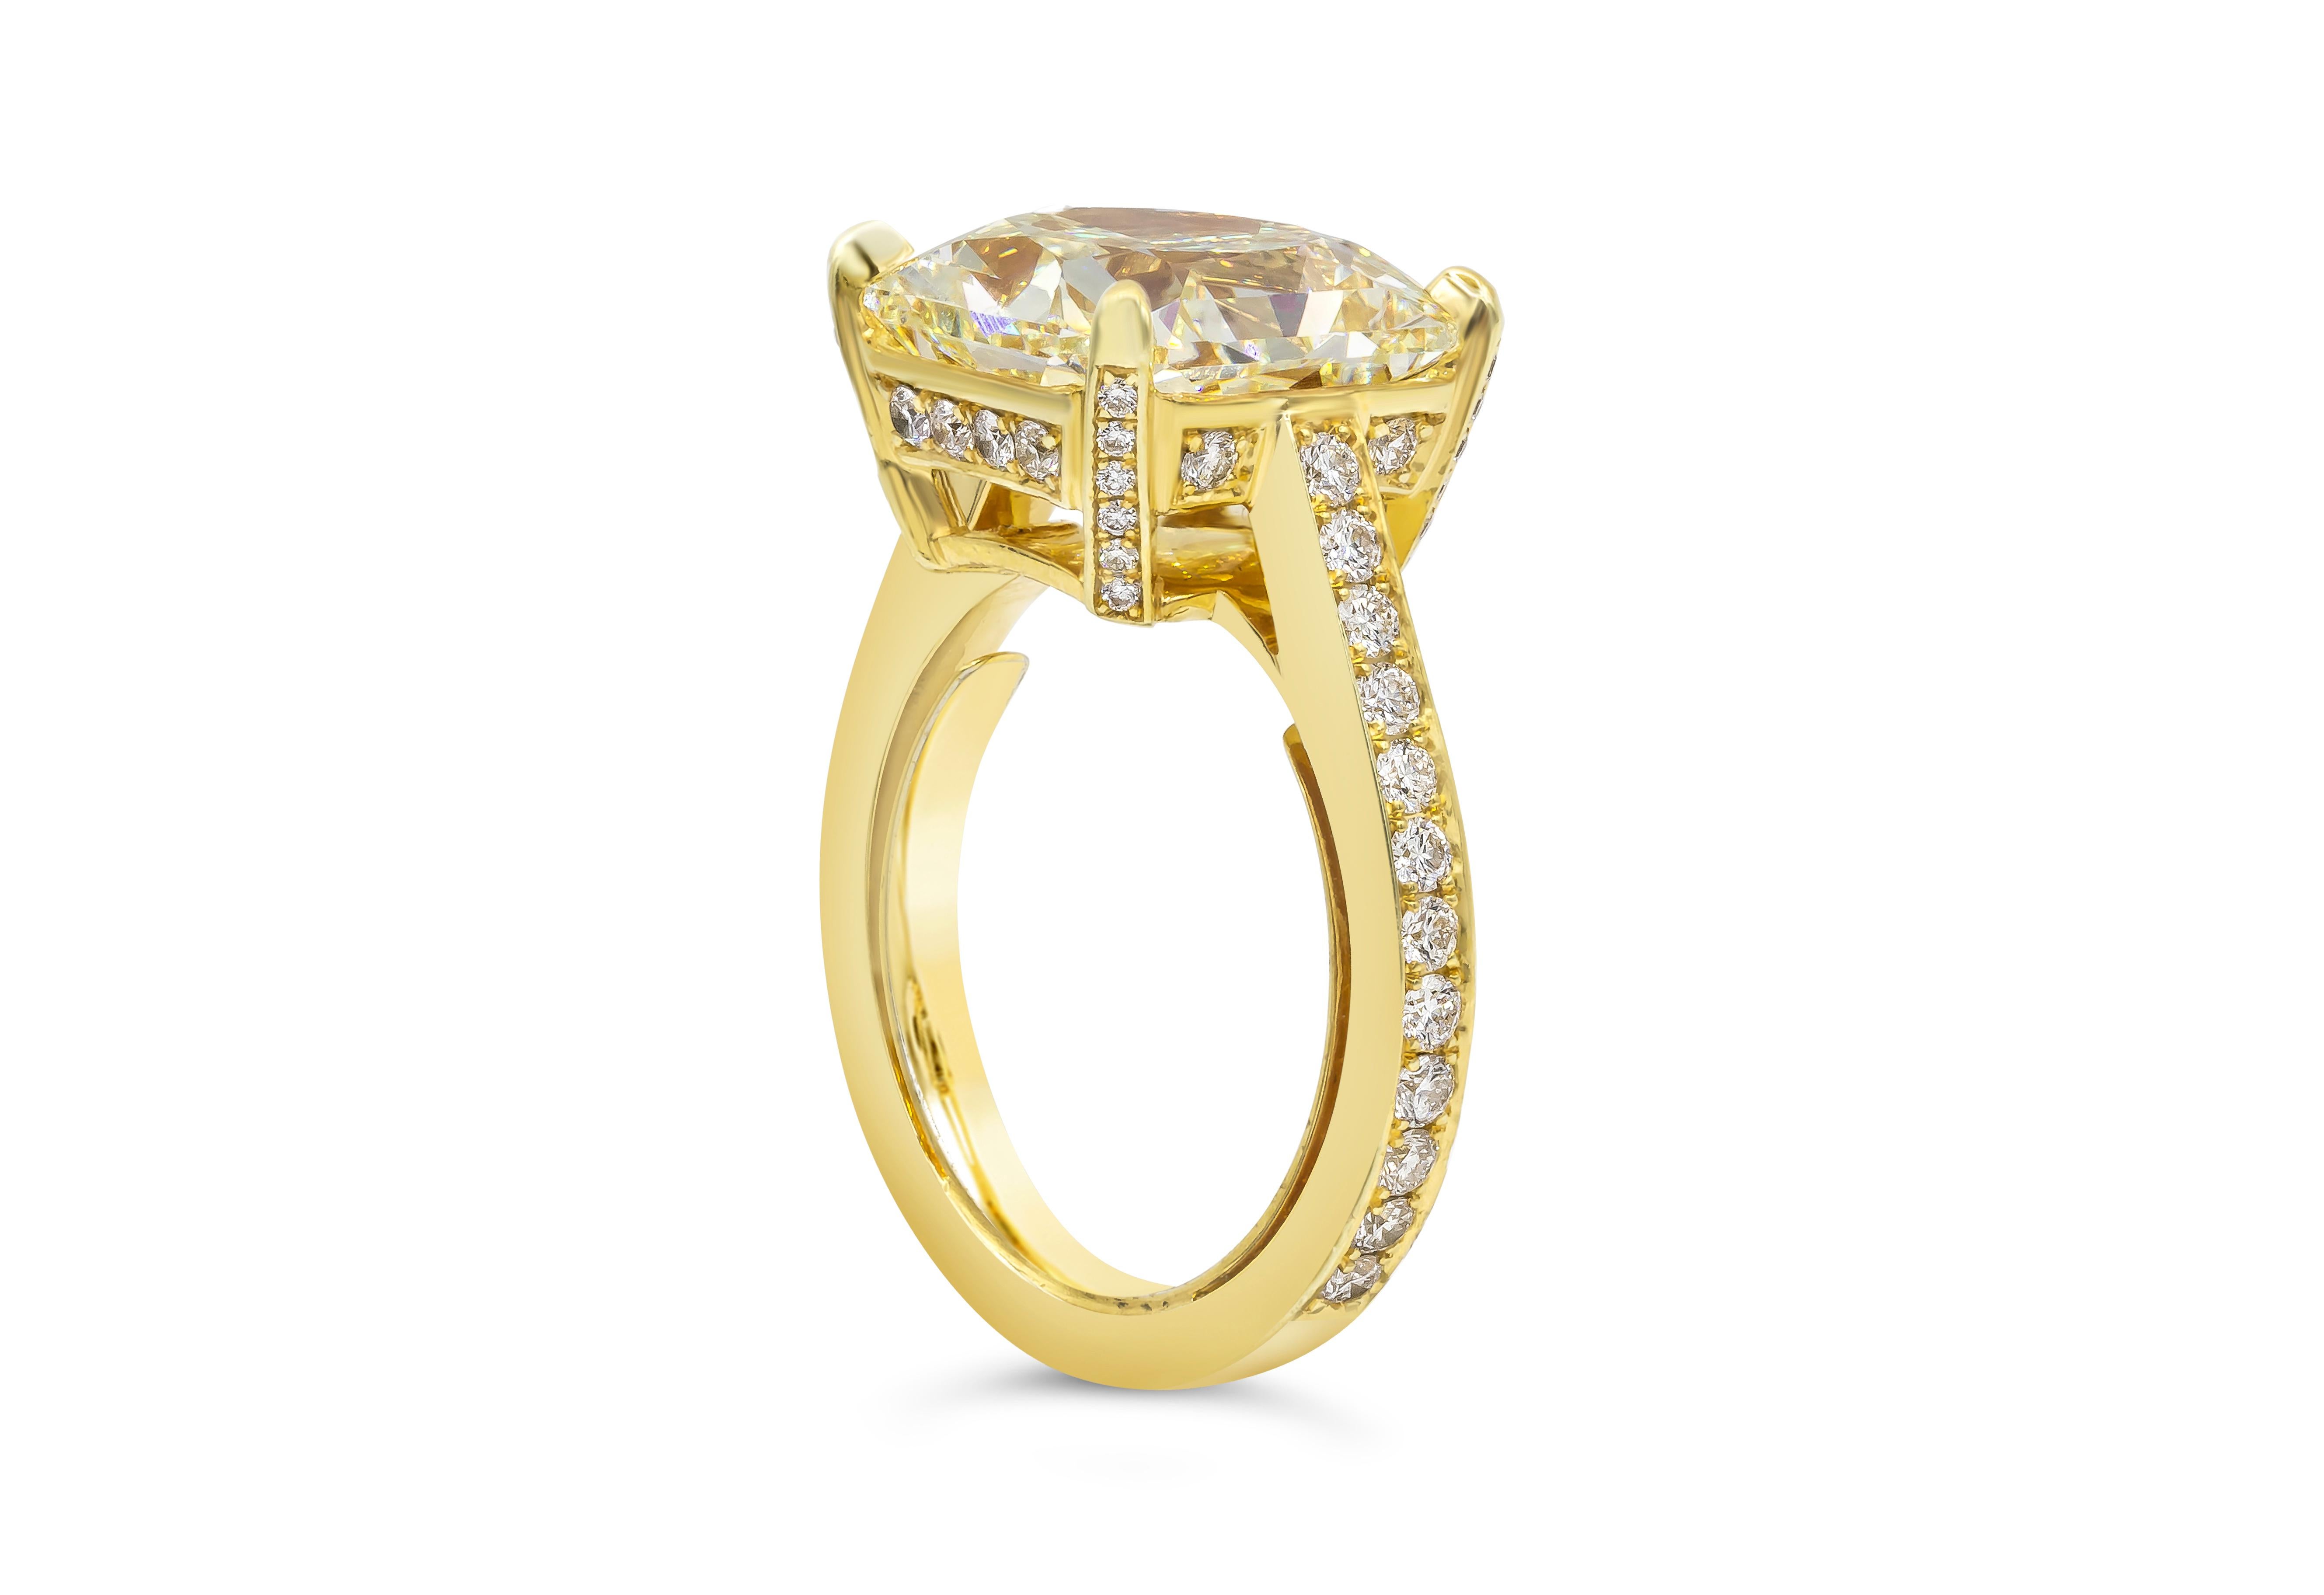 Timeless and classic pave engagement ring showcasing a vibrant 8.07 carat radiant cut diamond certified by GIA as fancy yellow color, VS1 in clarity, set in a four prong 18k yellow gold basket. Accented by 60 pieces of brilliant round diamonds